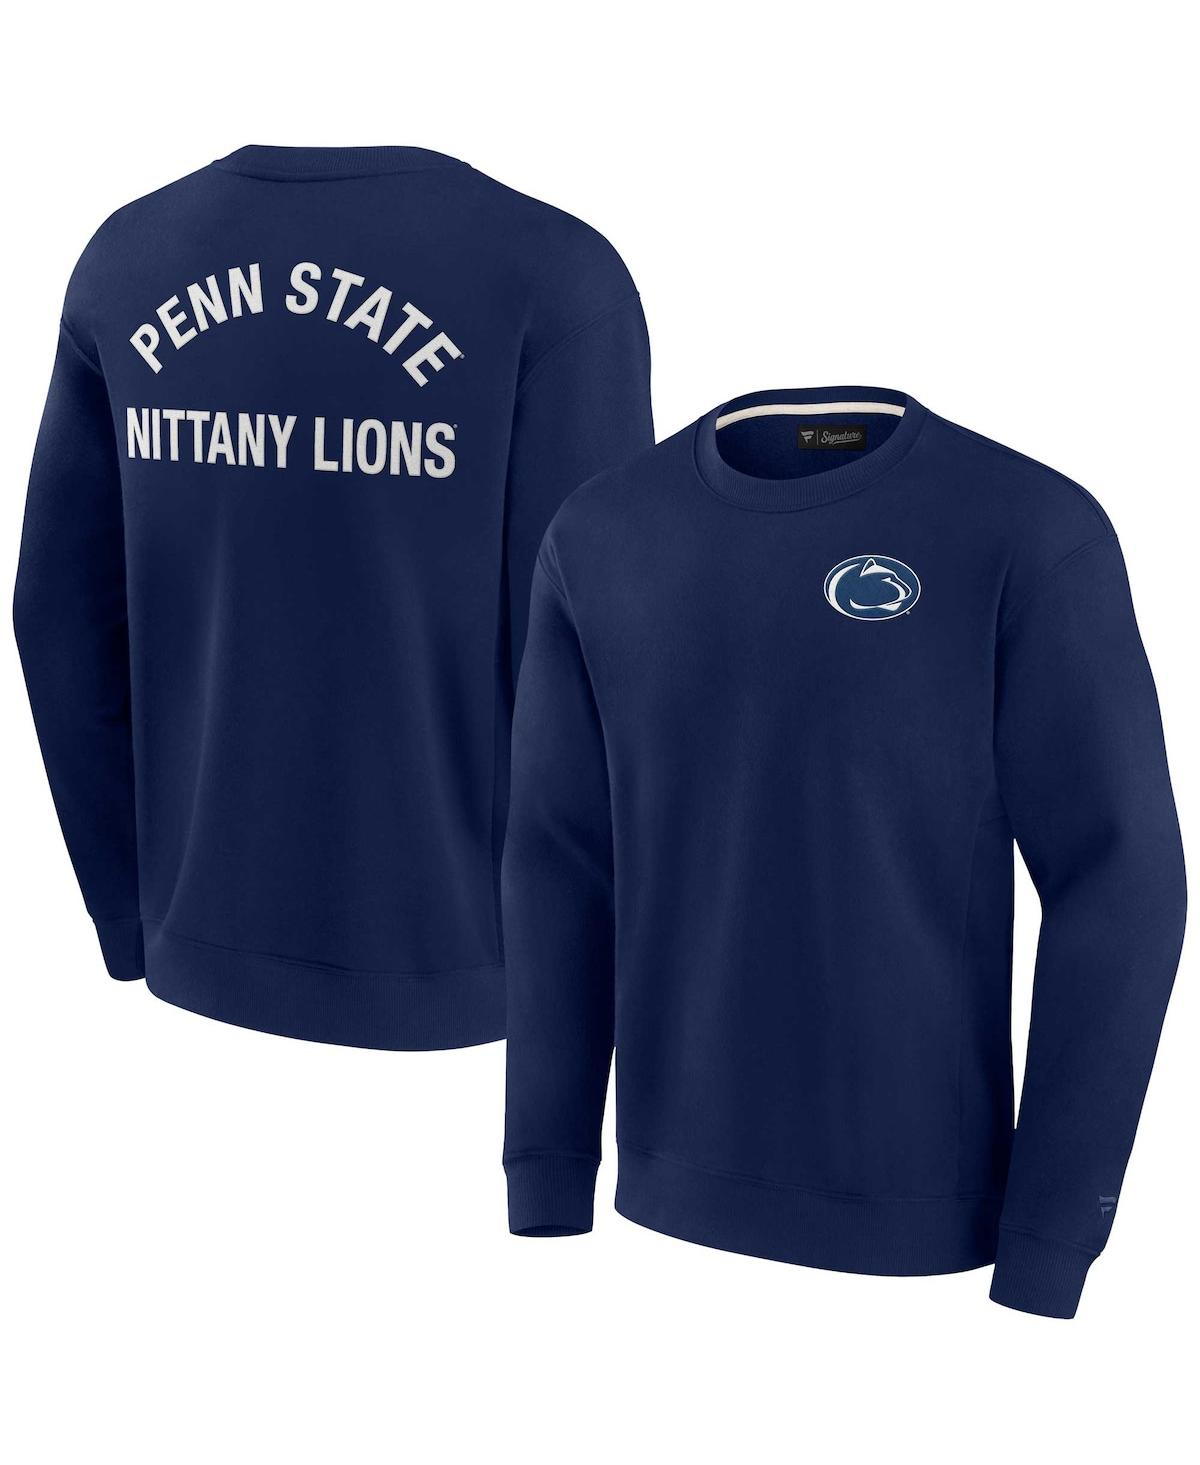 Shop Fanatics Signature Men's And Women's  Navy Penn State Nittany Lions Super Soft Pullover Crew Sweatshi